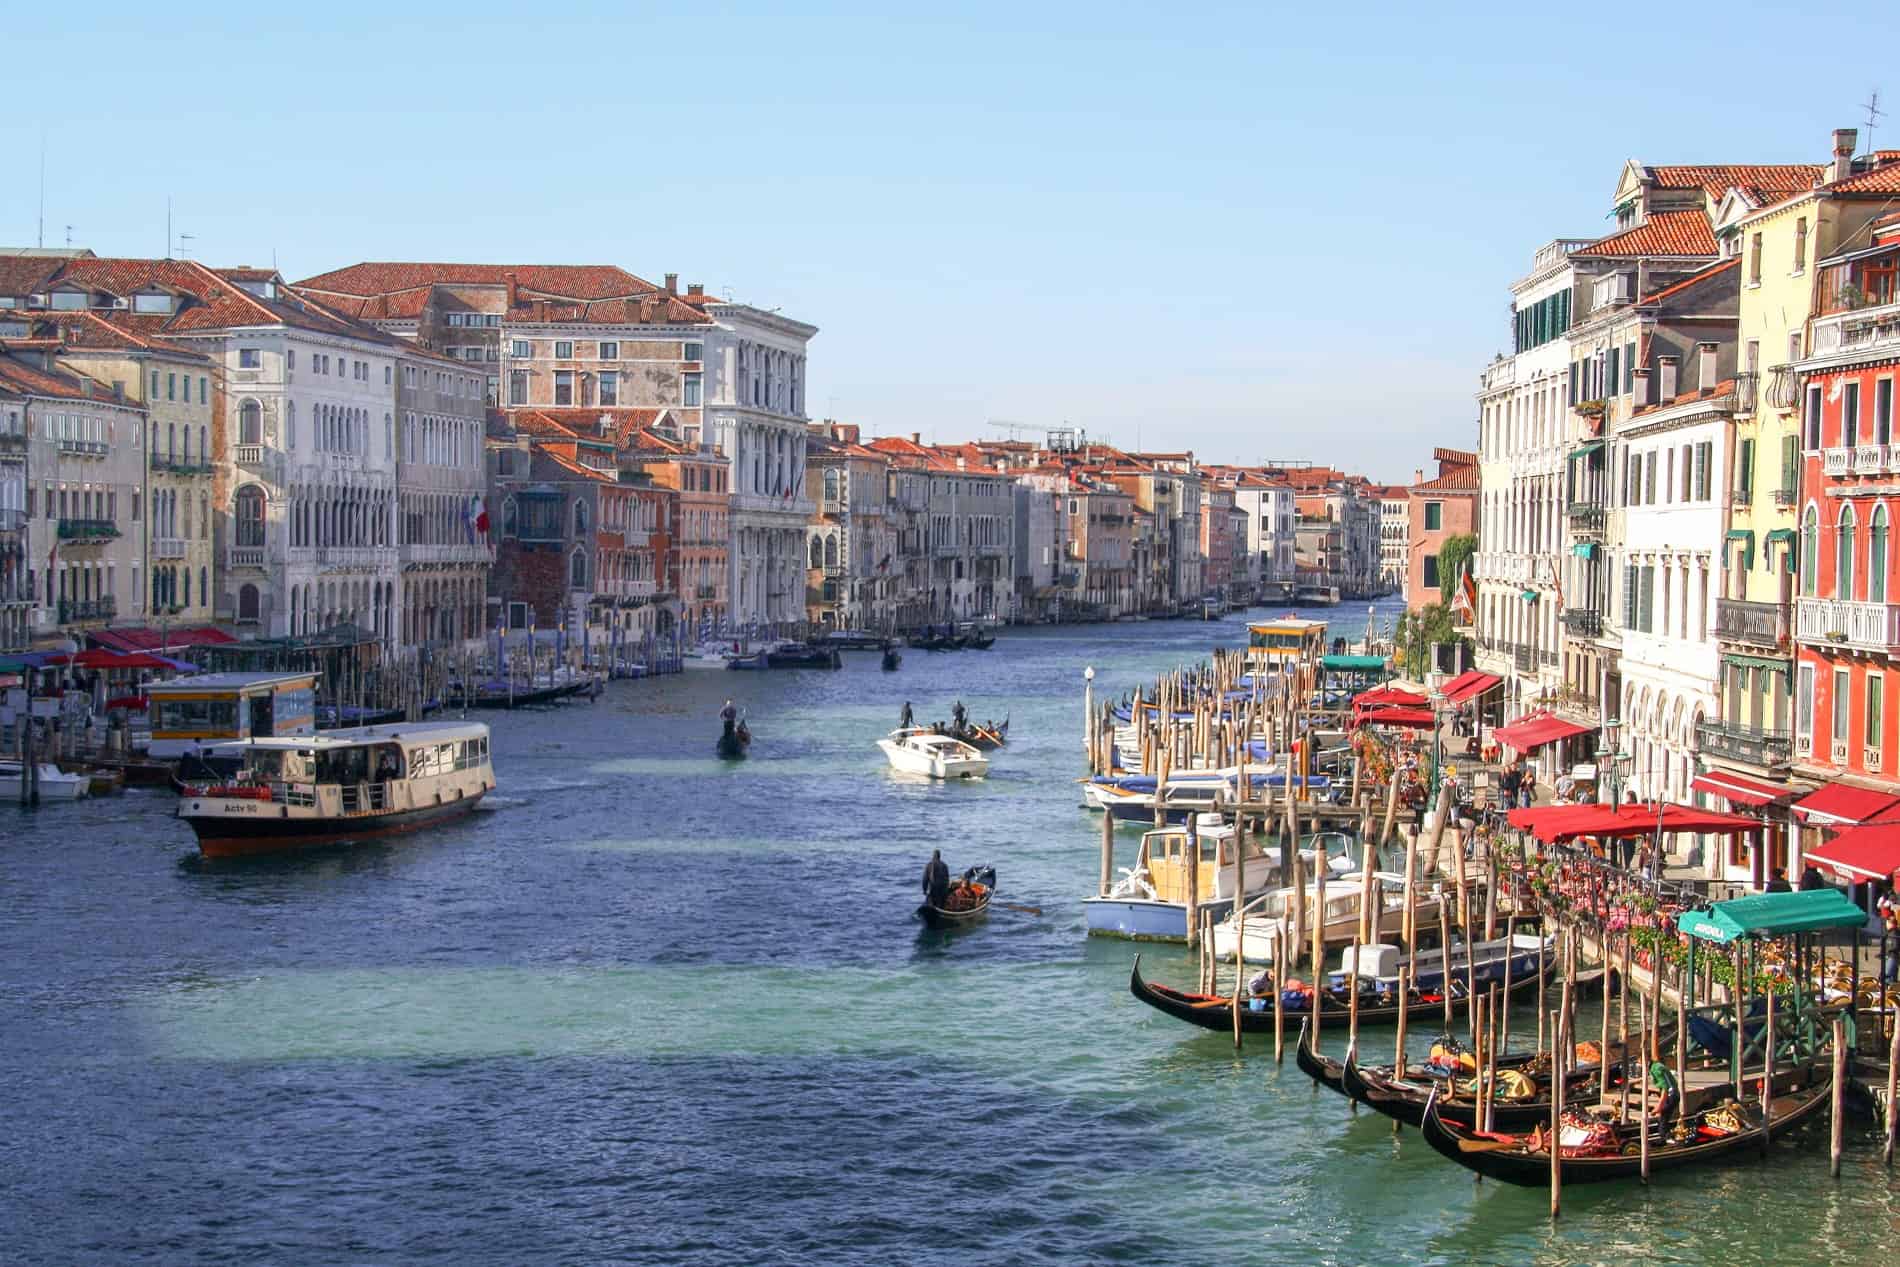 Elevated view of the wide boat-filled Grand Canal in Venice lined with tall, colourful buildings.